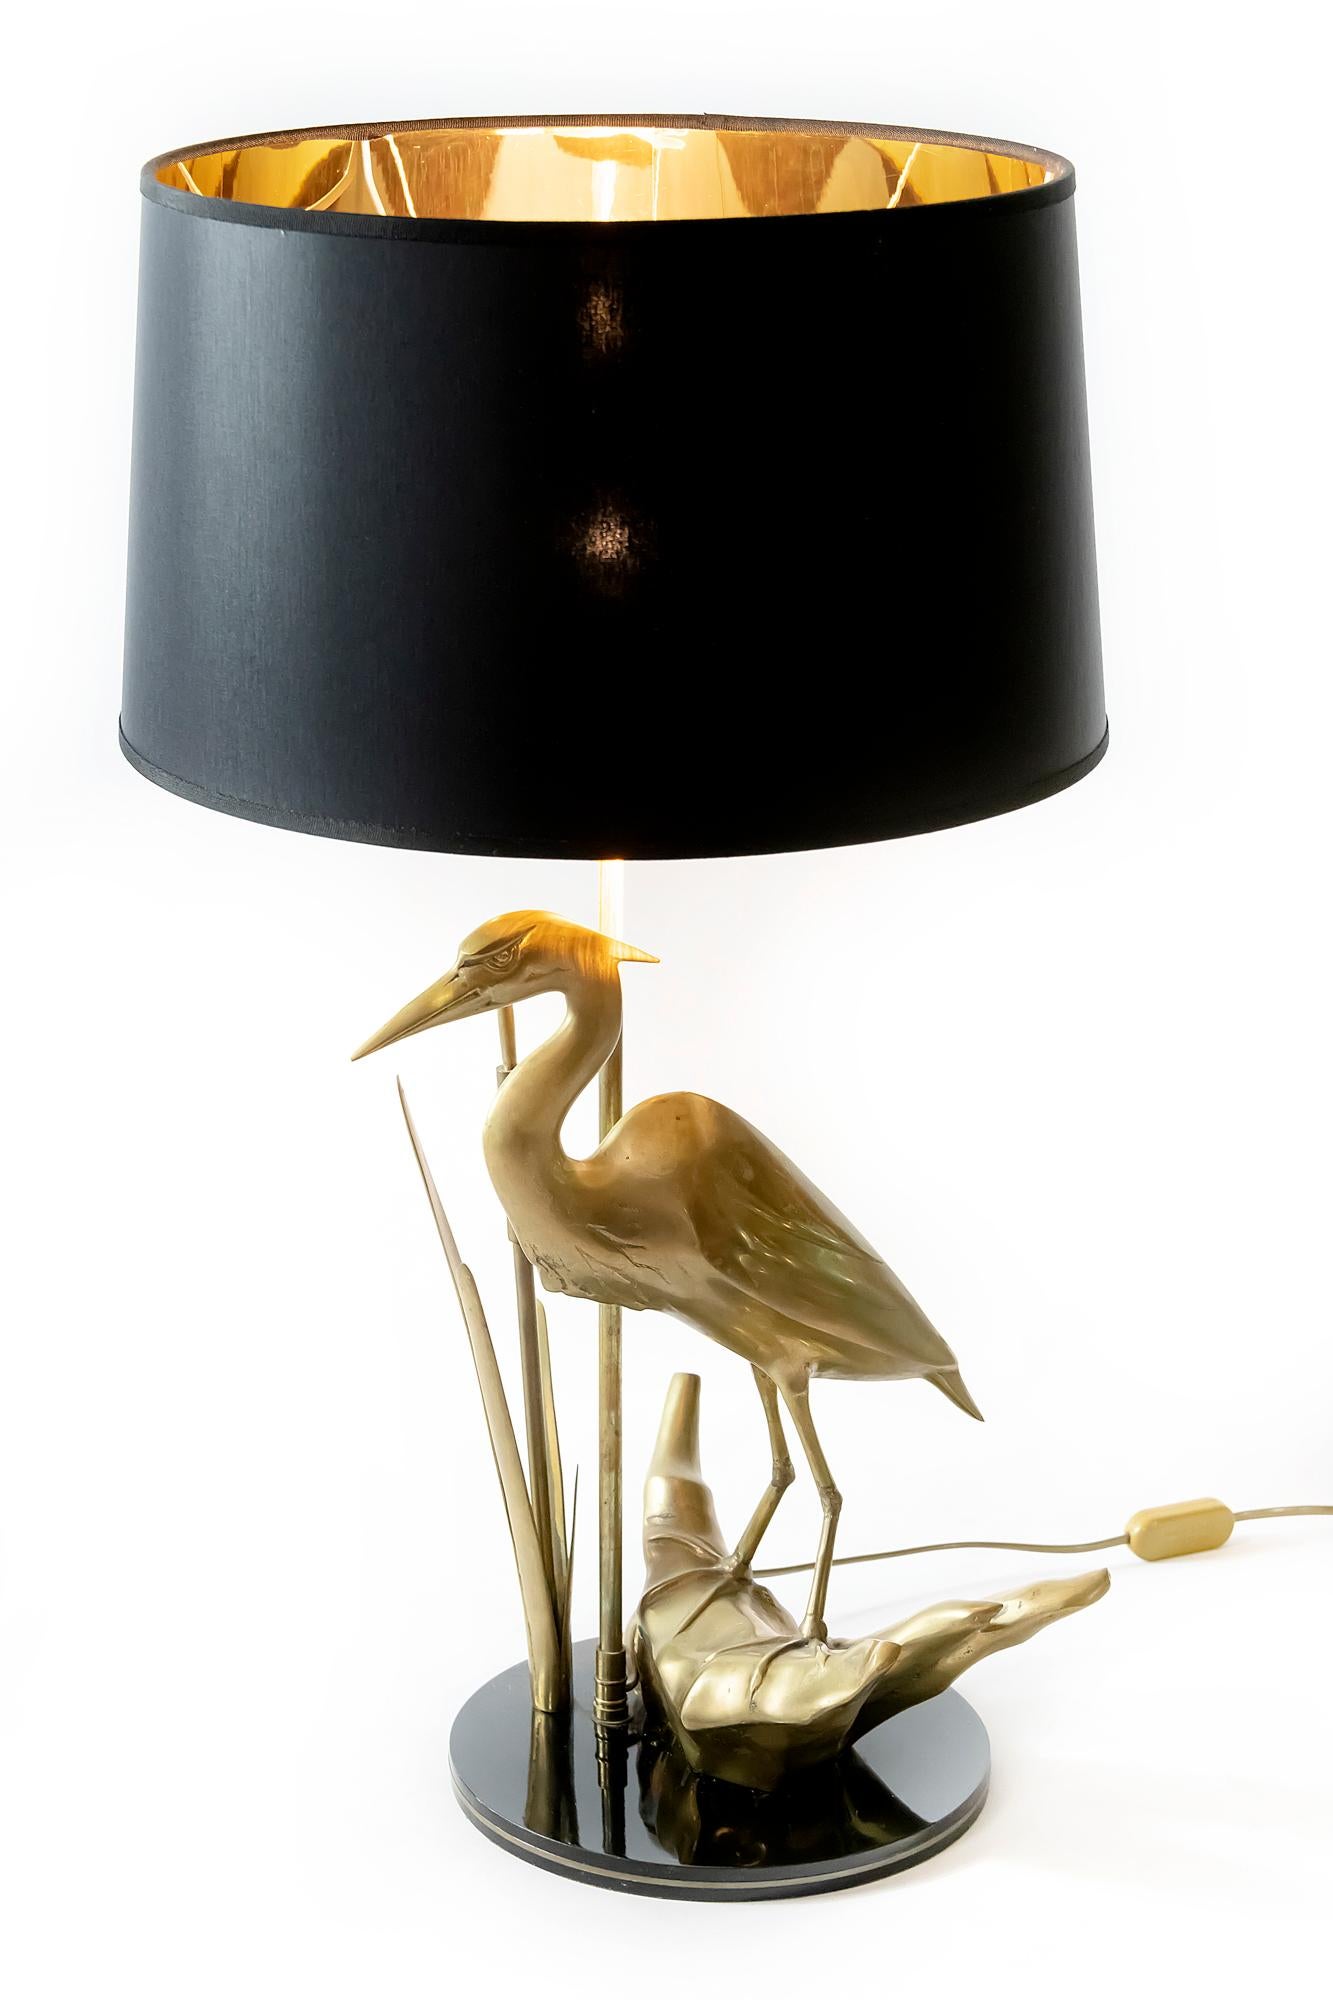 Vintage French table lamp with brass bird and floral elements on wooden base colored with glossy black colour, by Maison Charles.
Lamp is with the new made satin finish black color textile shade with gold inside.
Lamp includes E27 bulb.
 